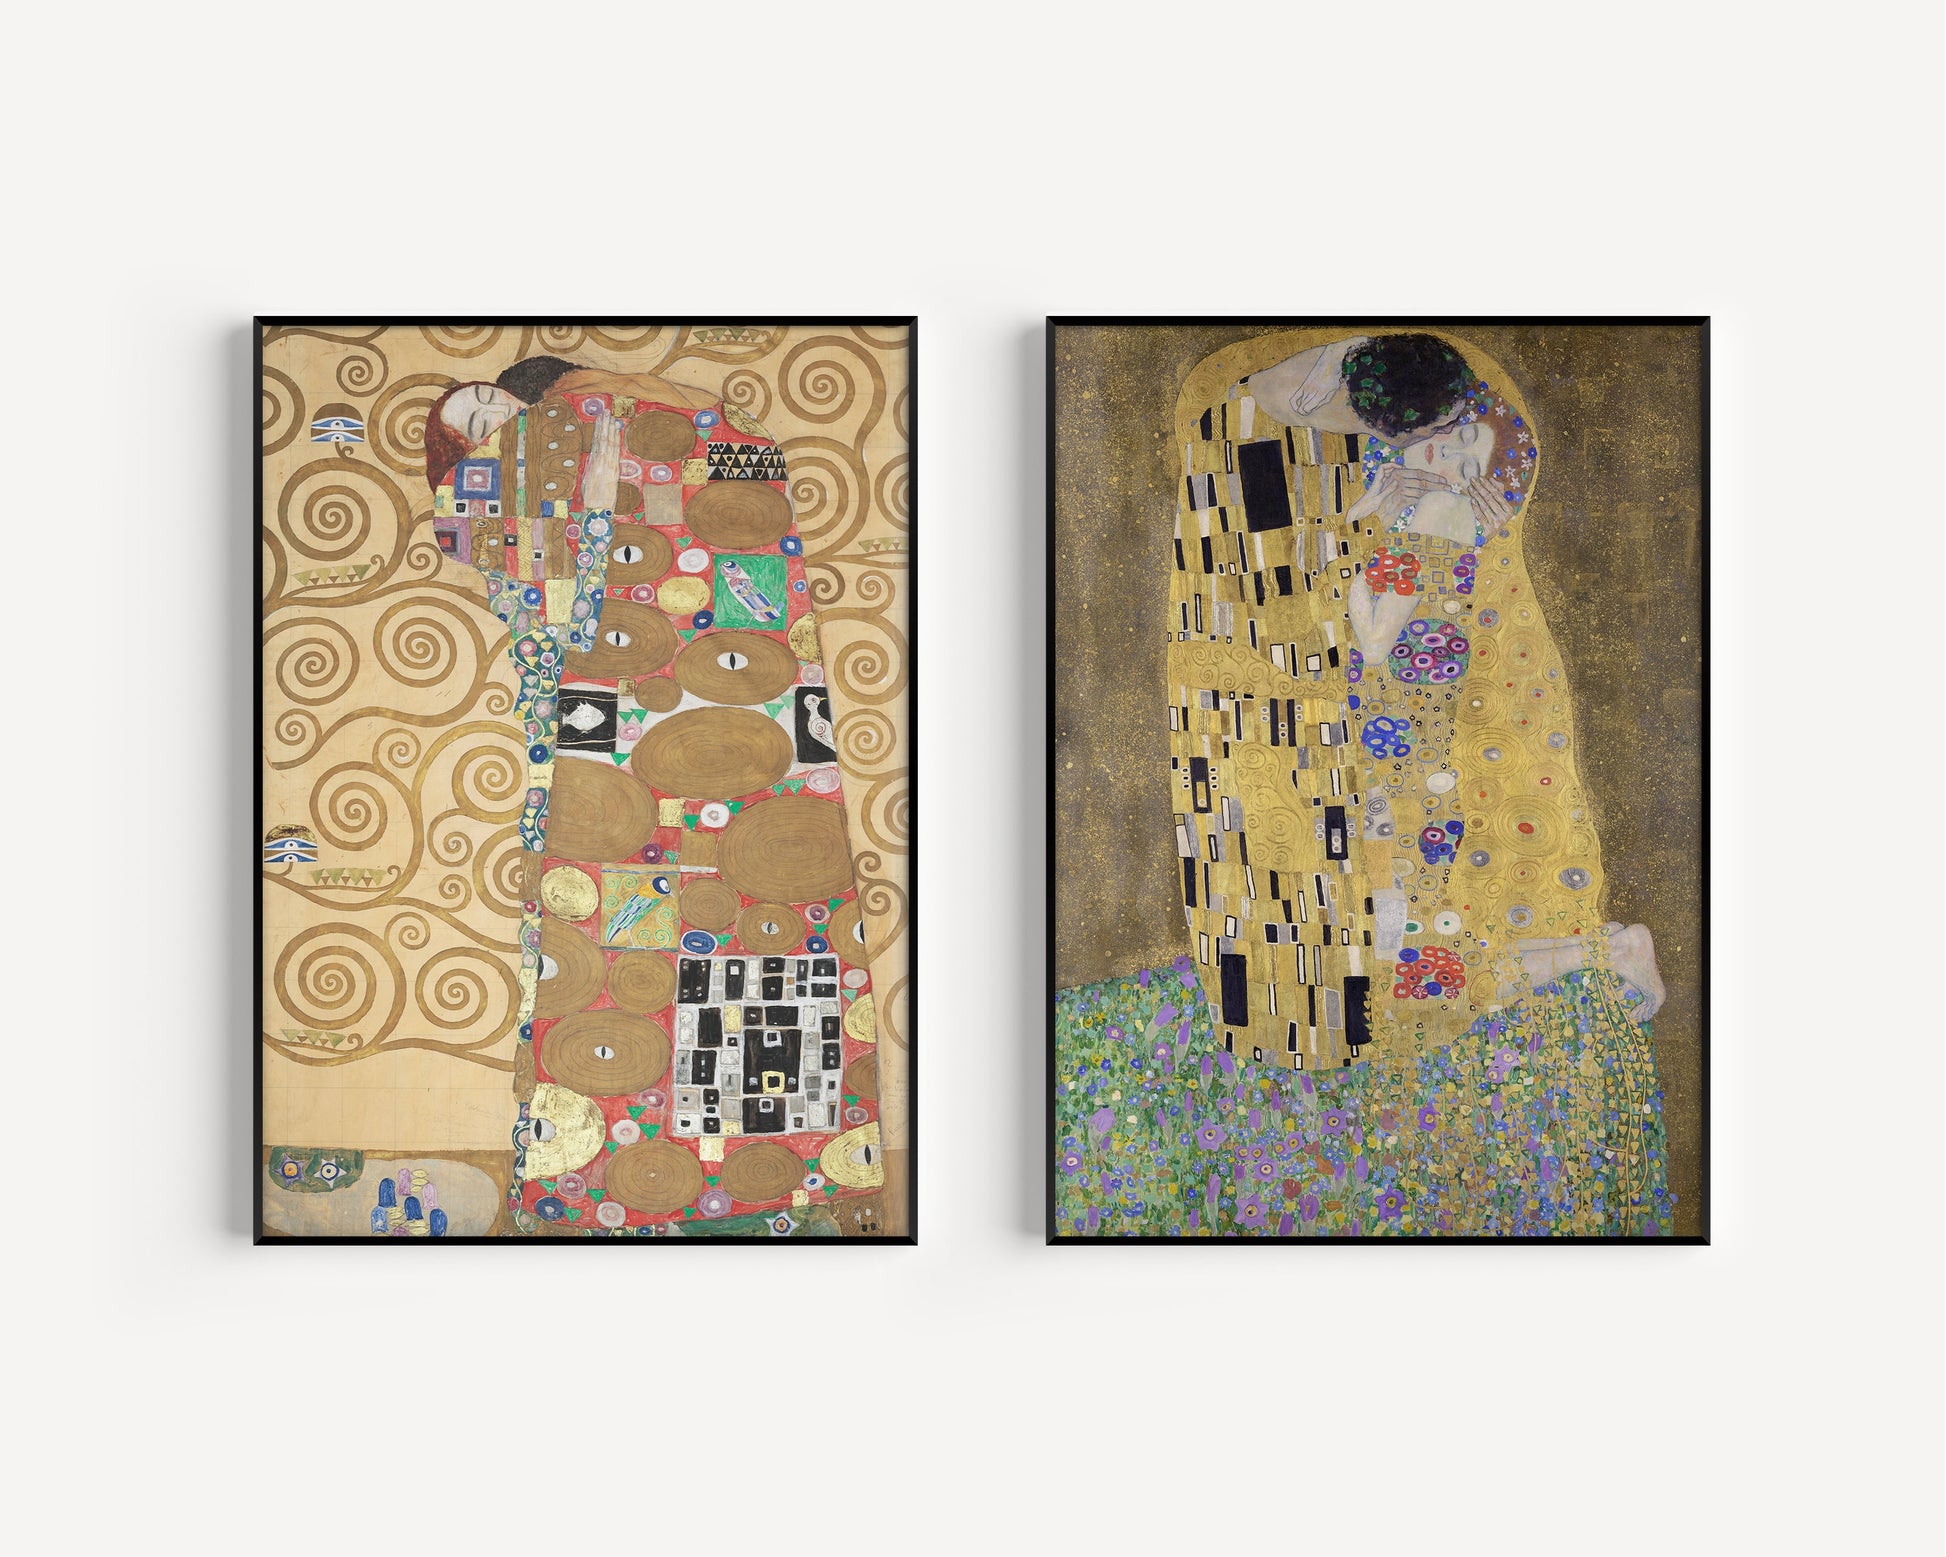 Gustav Klimt Set of 2 Prints The Embrace and The Kiss Iconic Art Museum Famous Painting Framed Ready to Hang Home Office Poster Print Decor